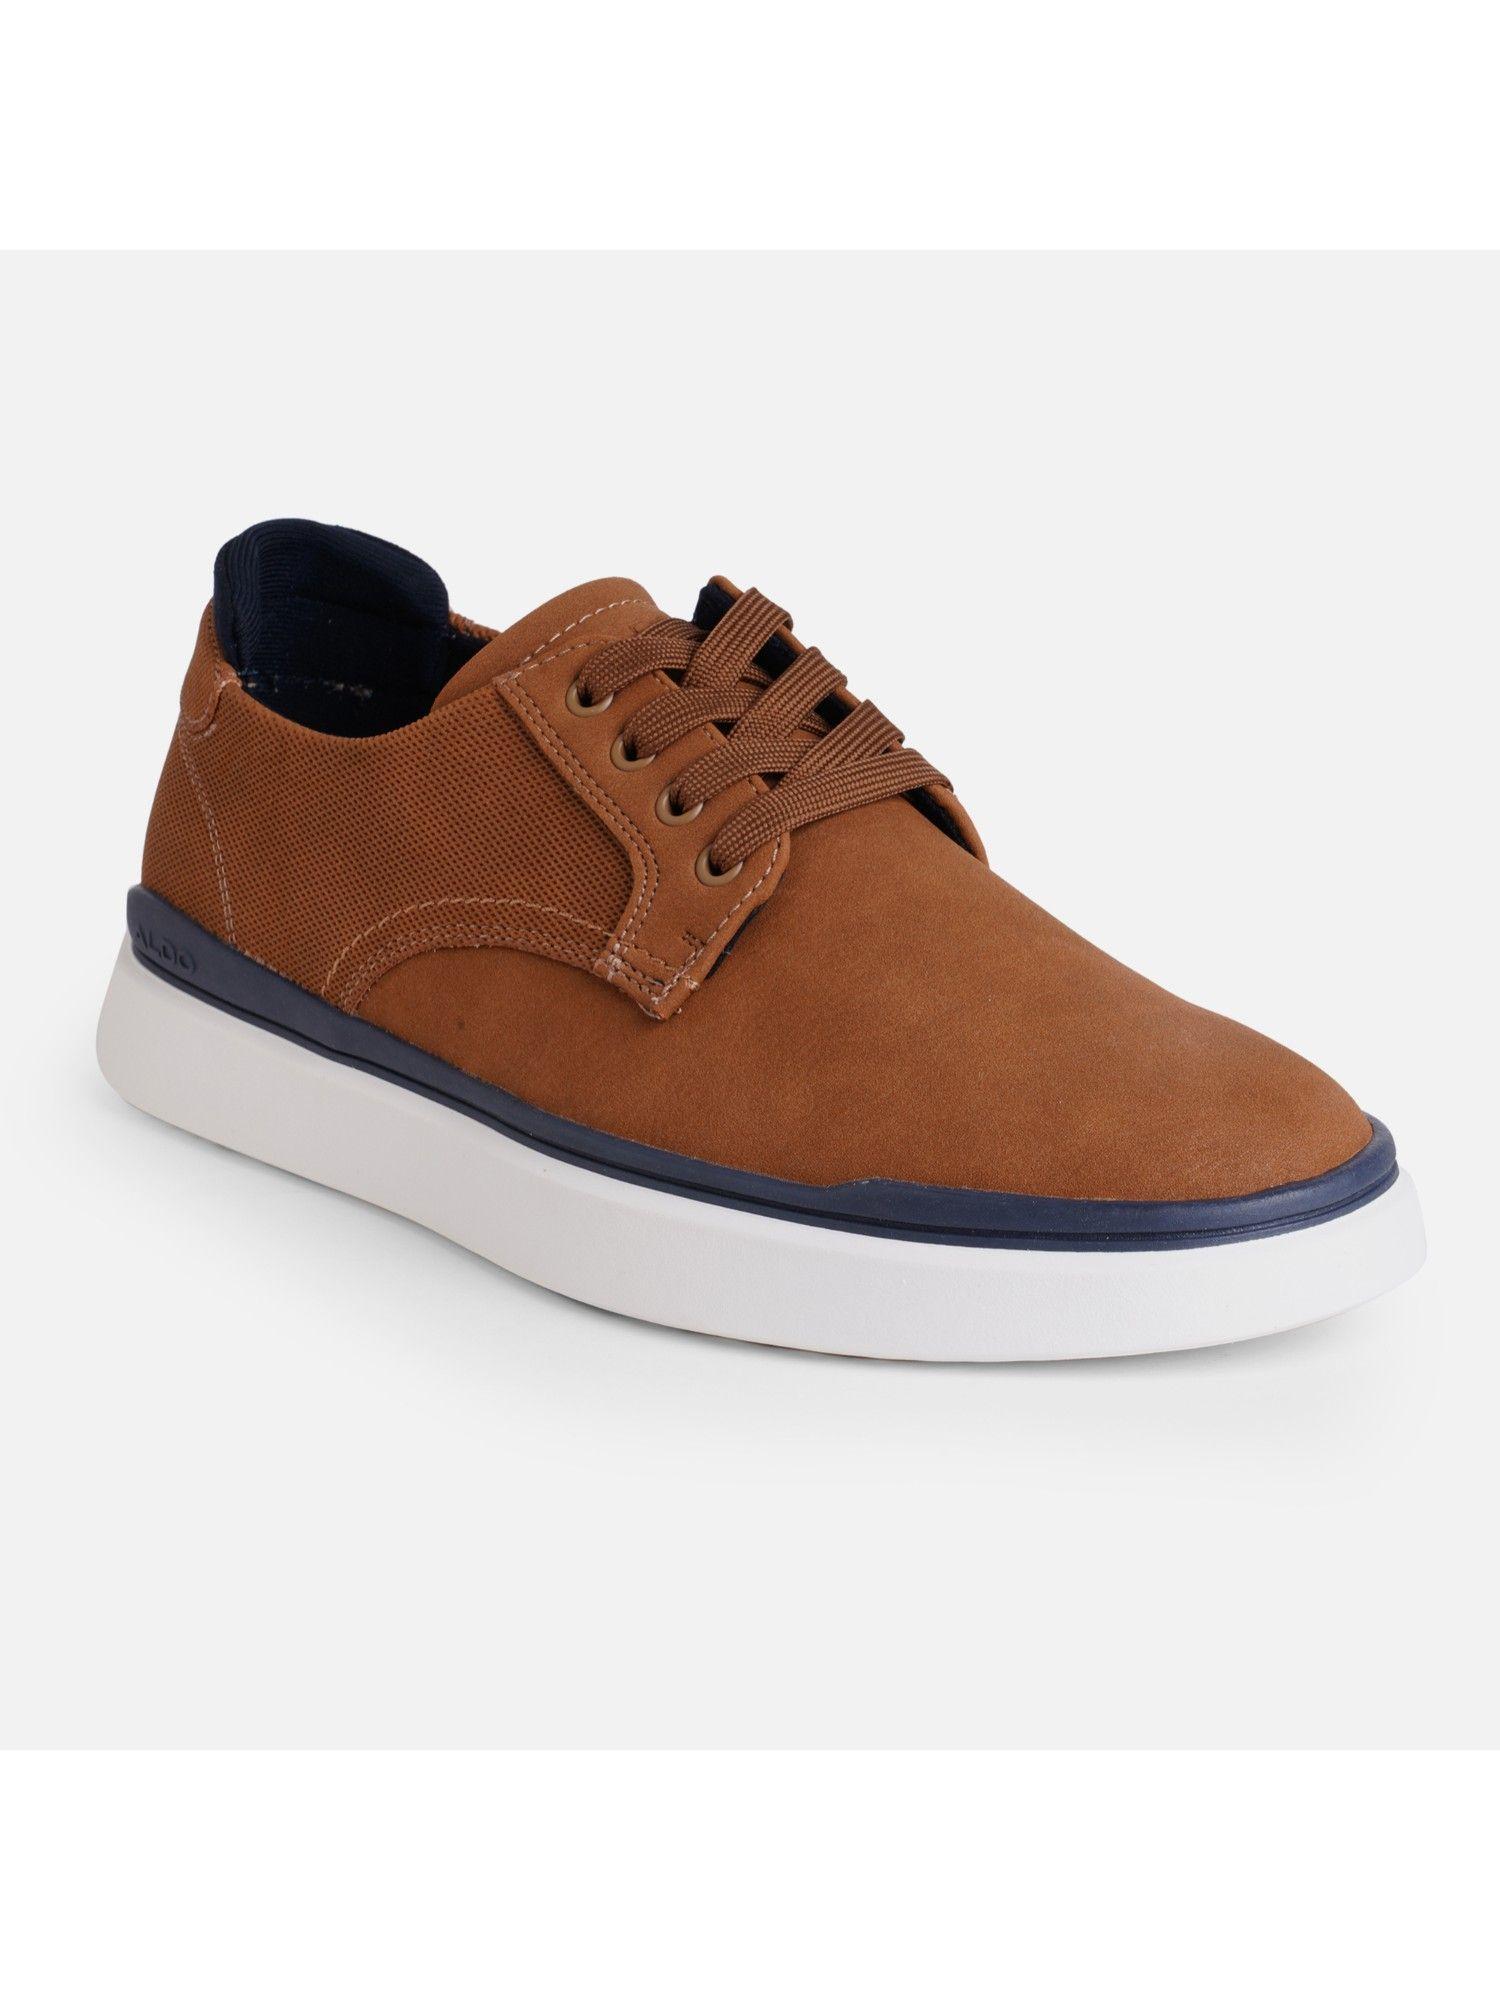 grouville-synthetic-tan-solid-shoe-lace-up